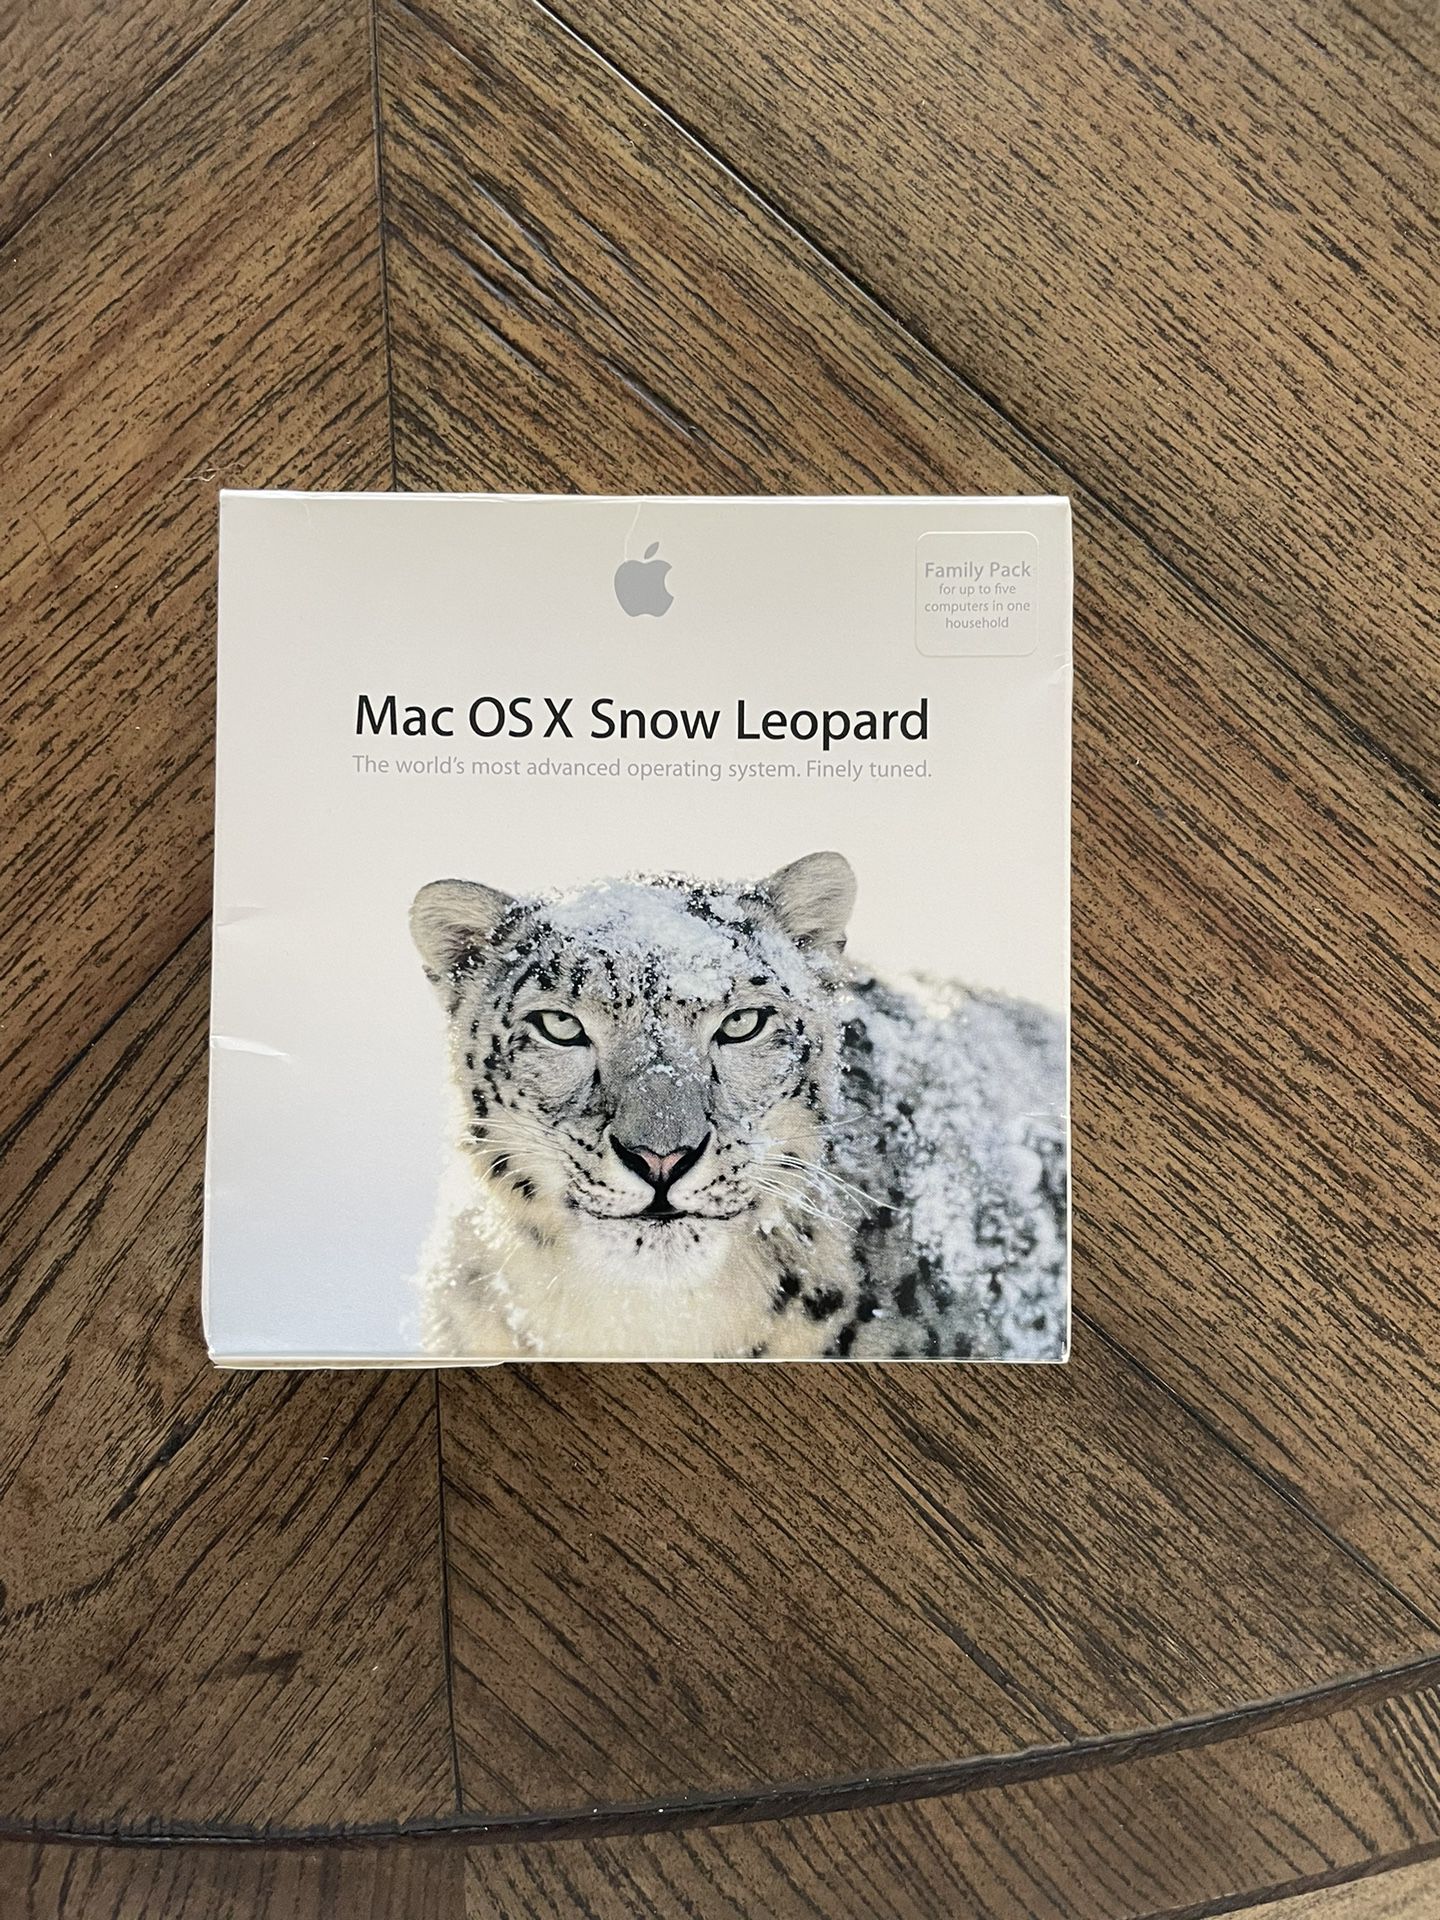 Apple Mac OS X 10.6.3 Snow Leopard Install DVD Disc with Manual & Decals - Family Pack